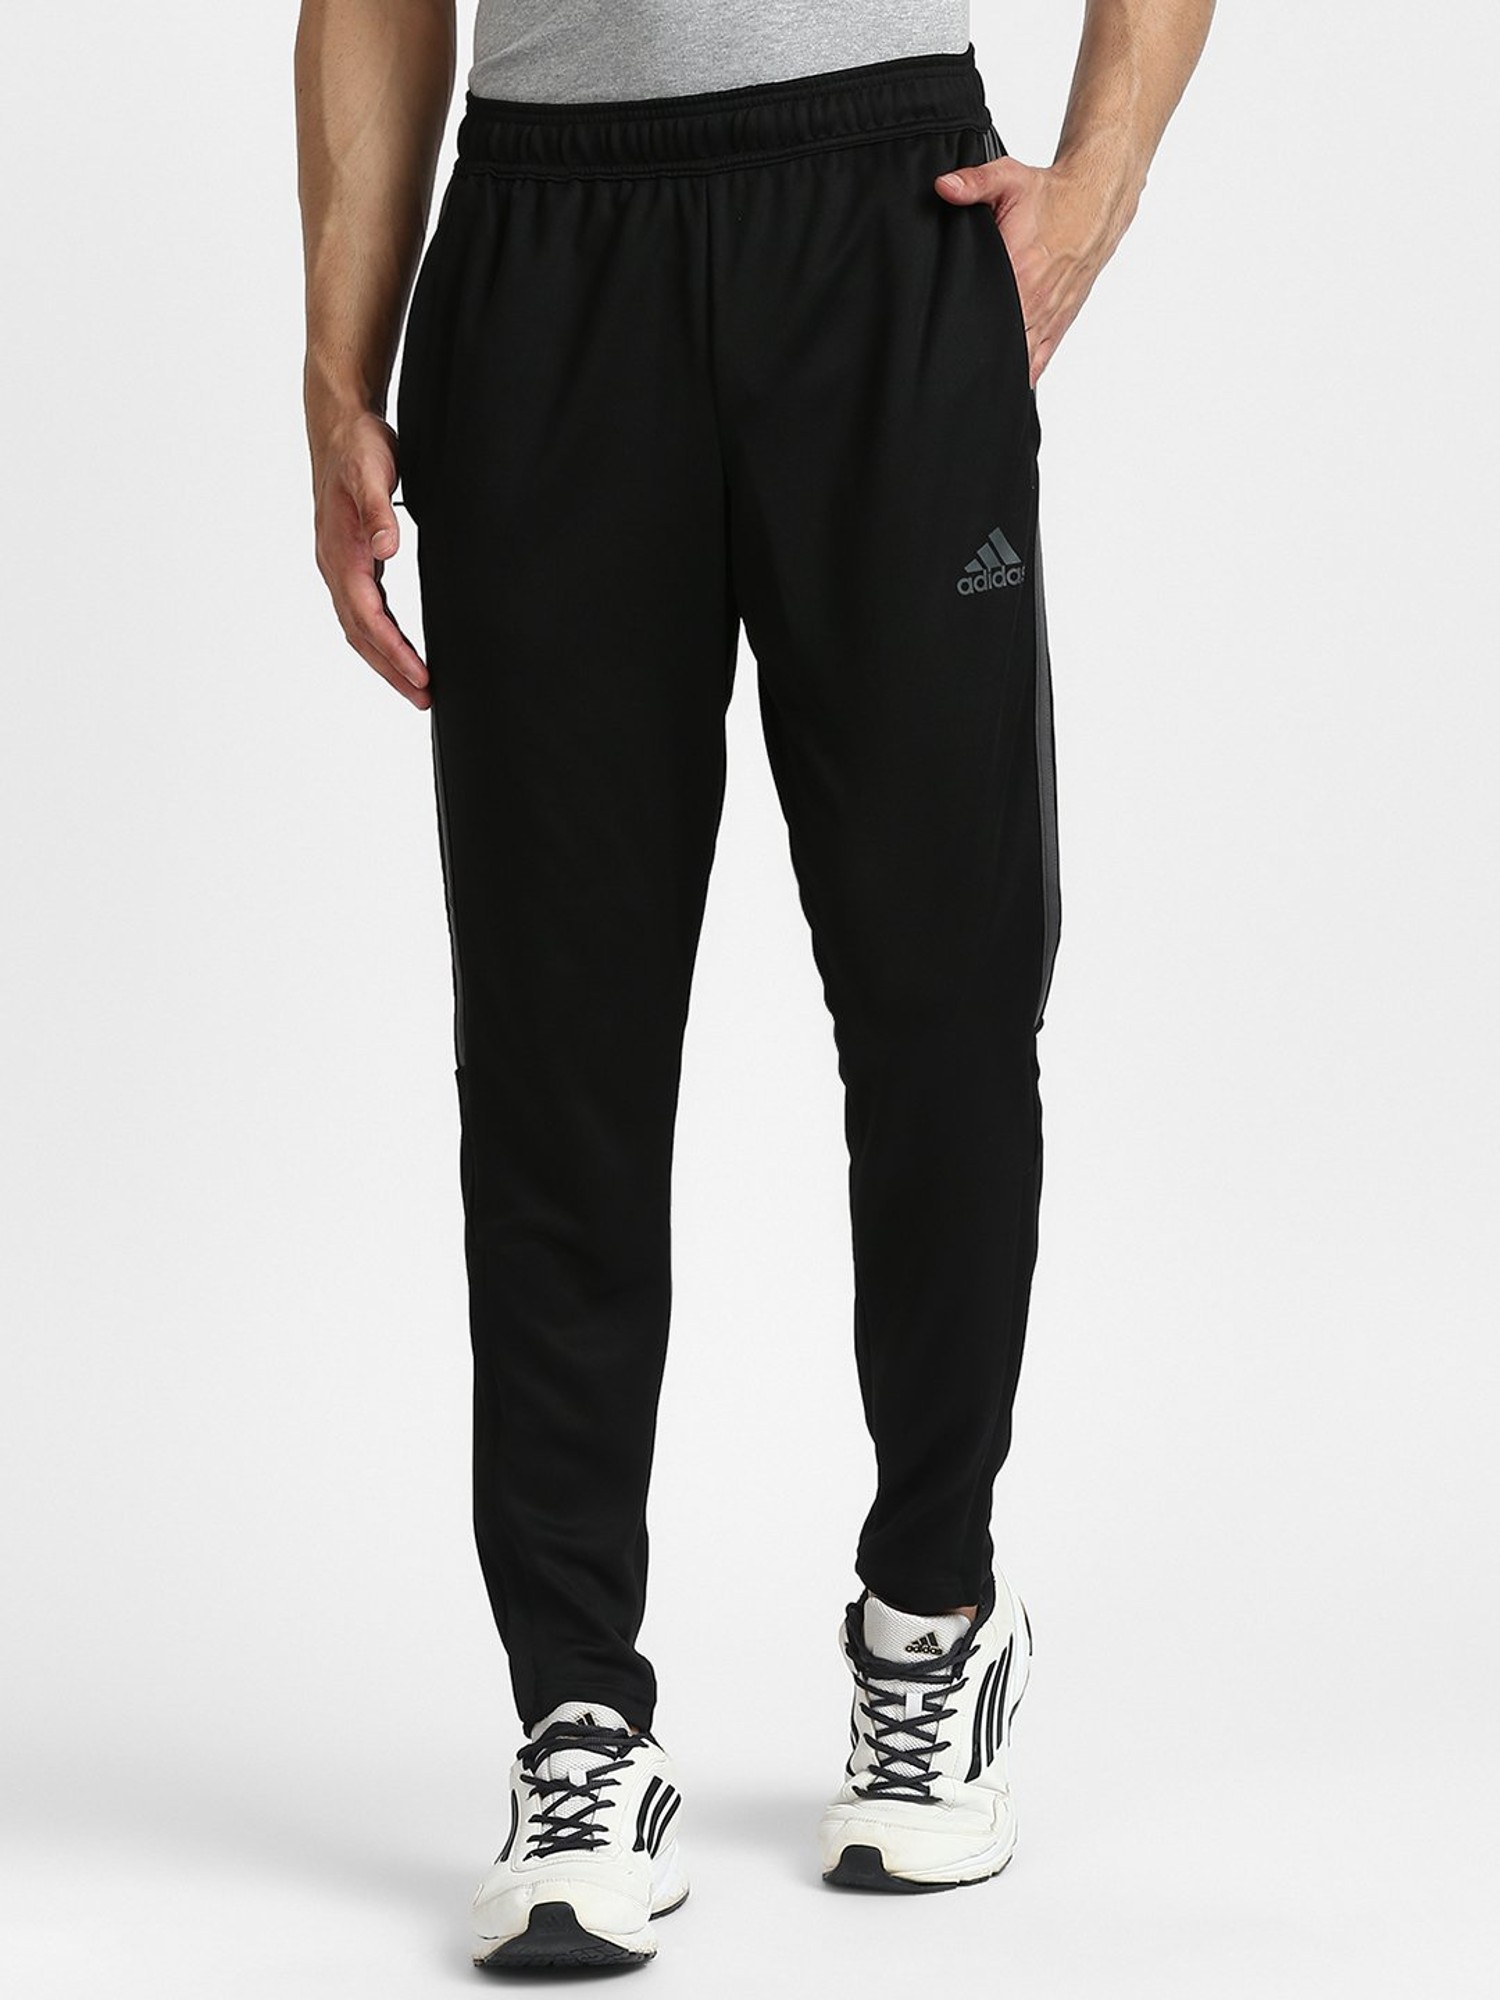 adidas - Superstar Relaxed Cropped Track Pants | Track pants mens, Running  clothes, Short sweatpants